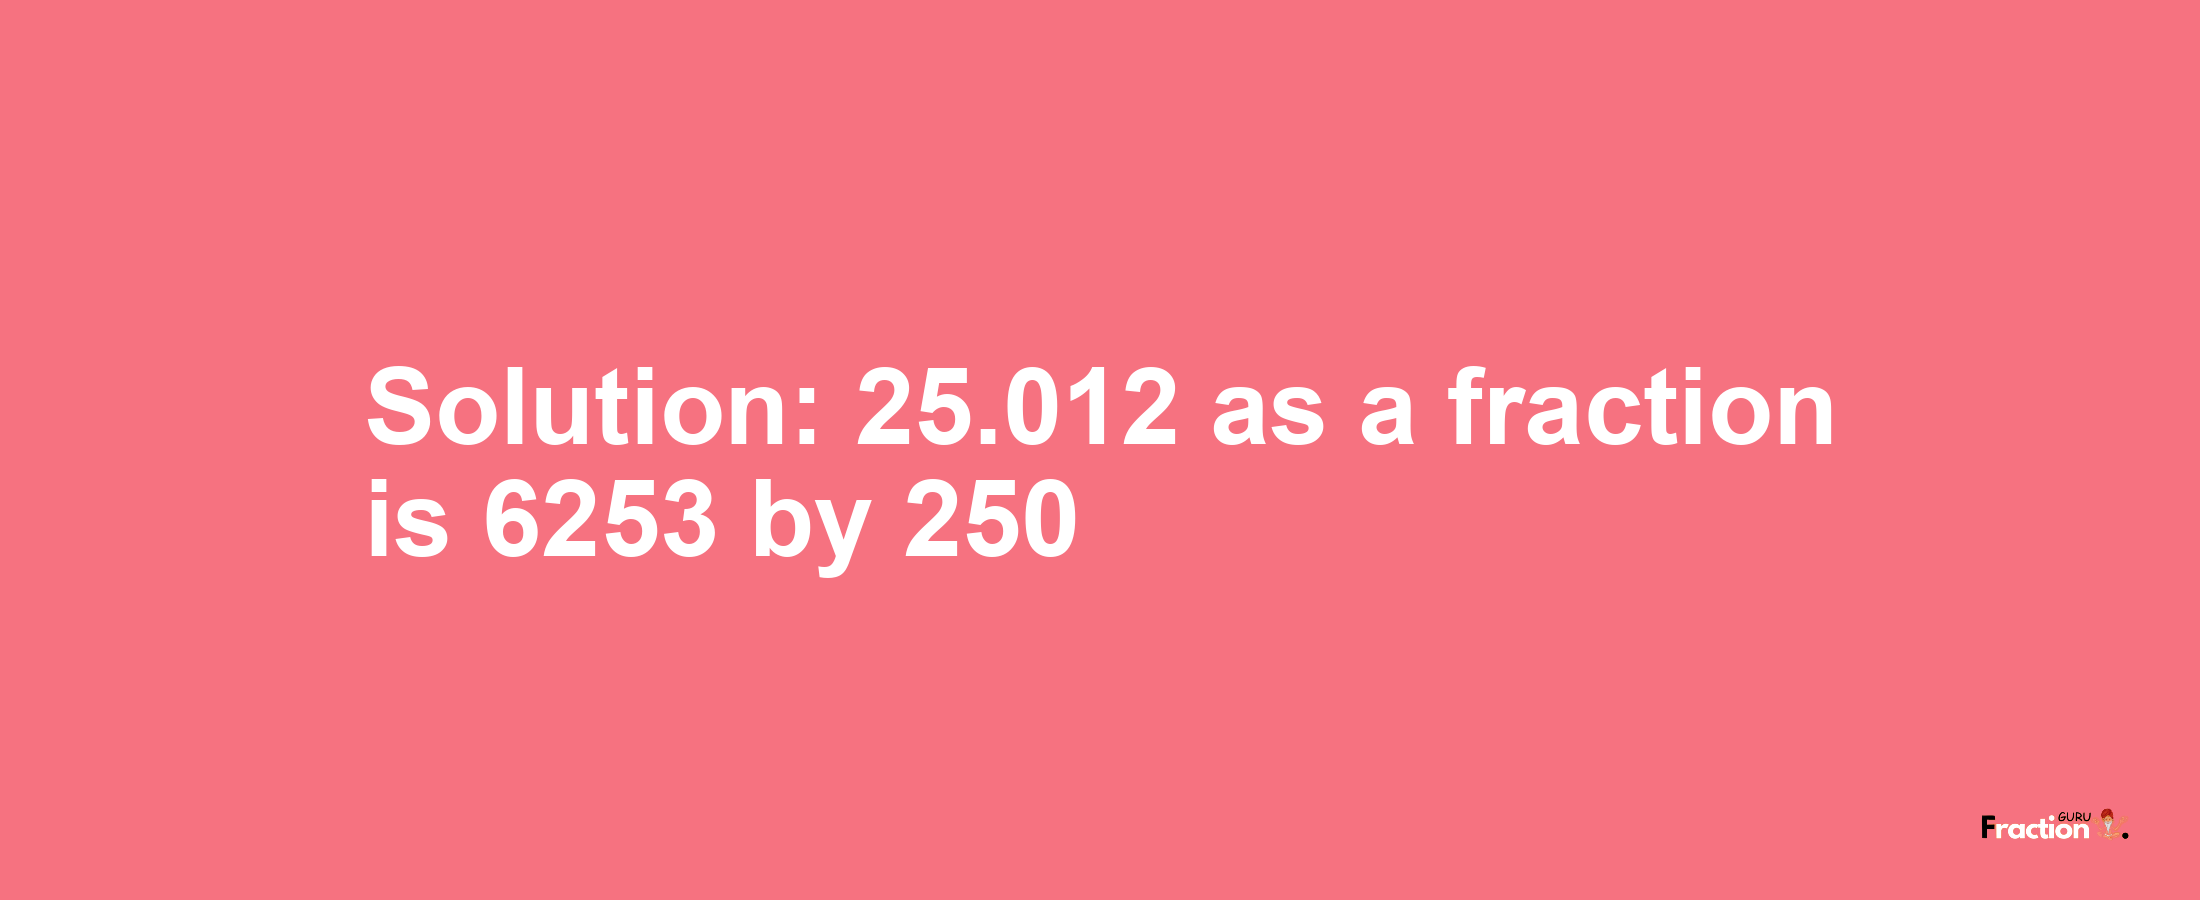 Solution:25.012 as a fraction is 6253/250